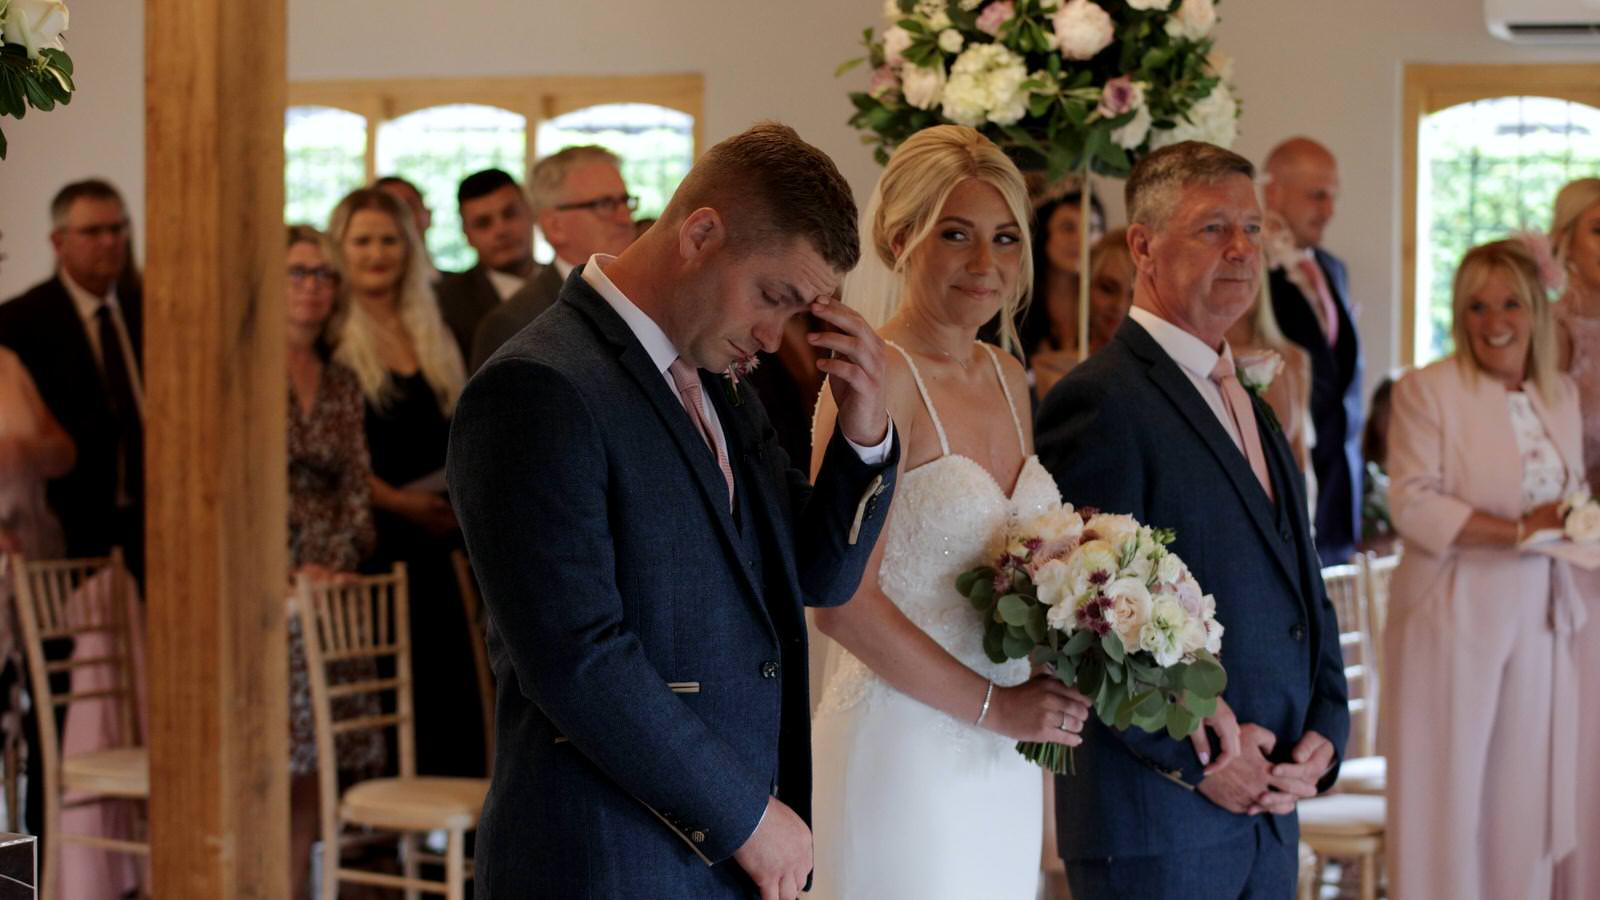 video of emotional groom during wedding ceremony at Merrydale